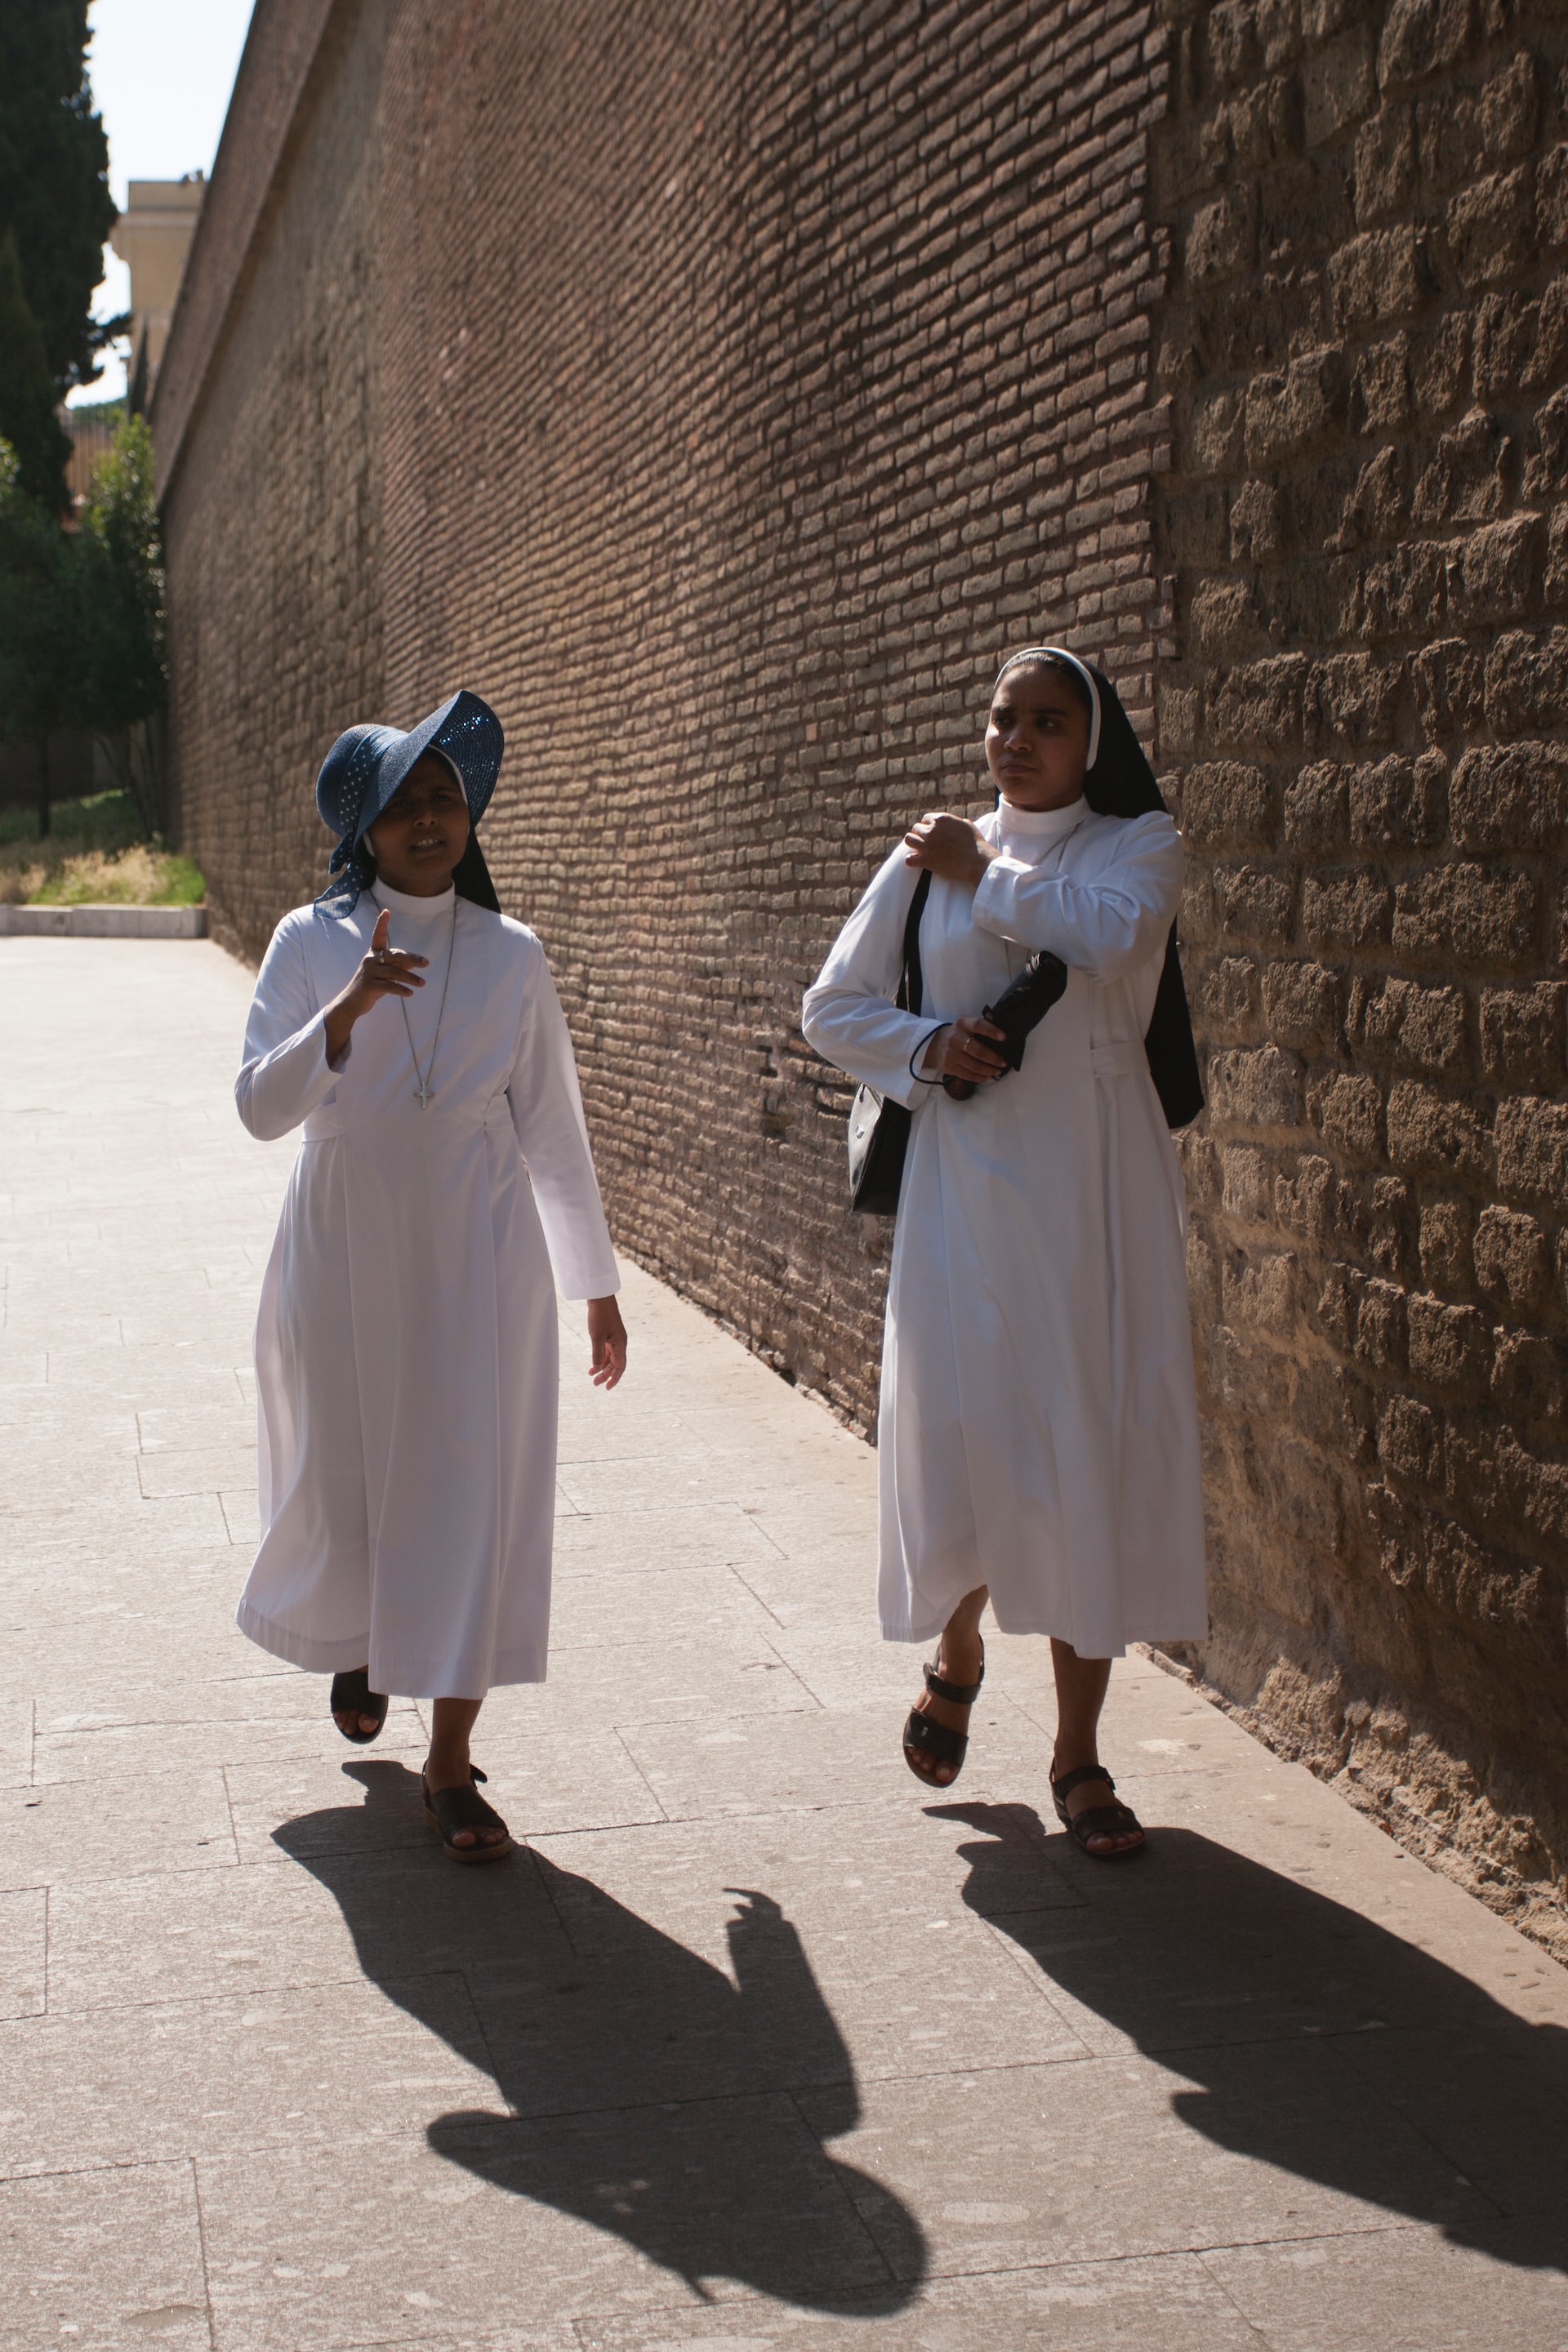 Two African Nuns In Rome